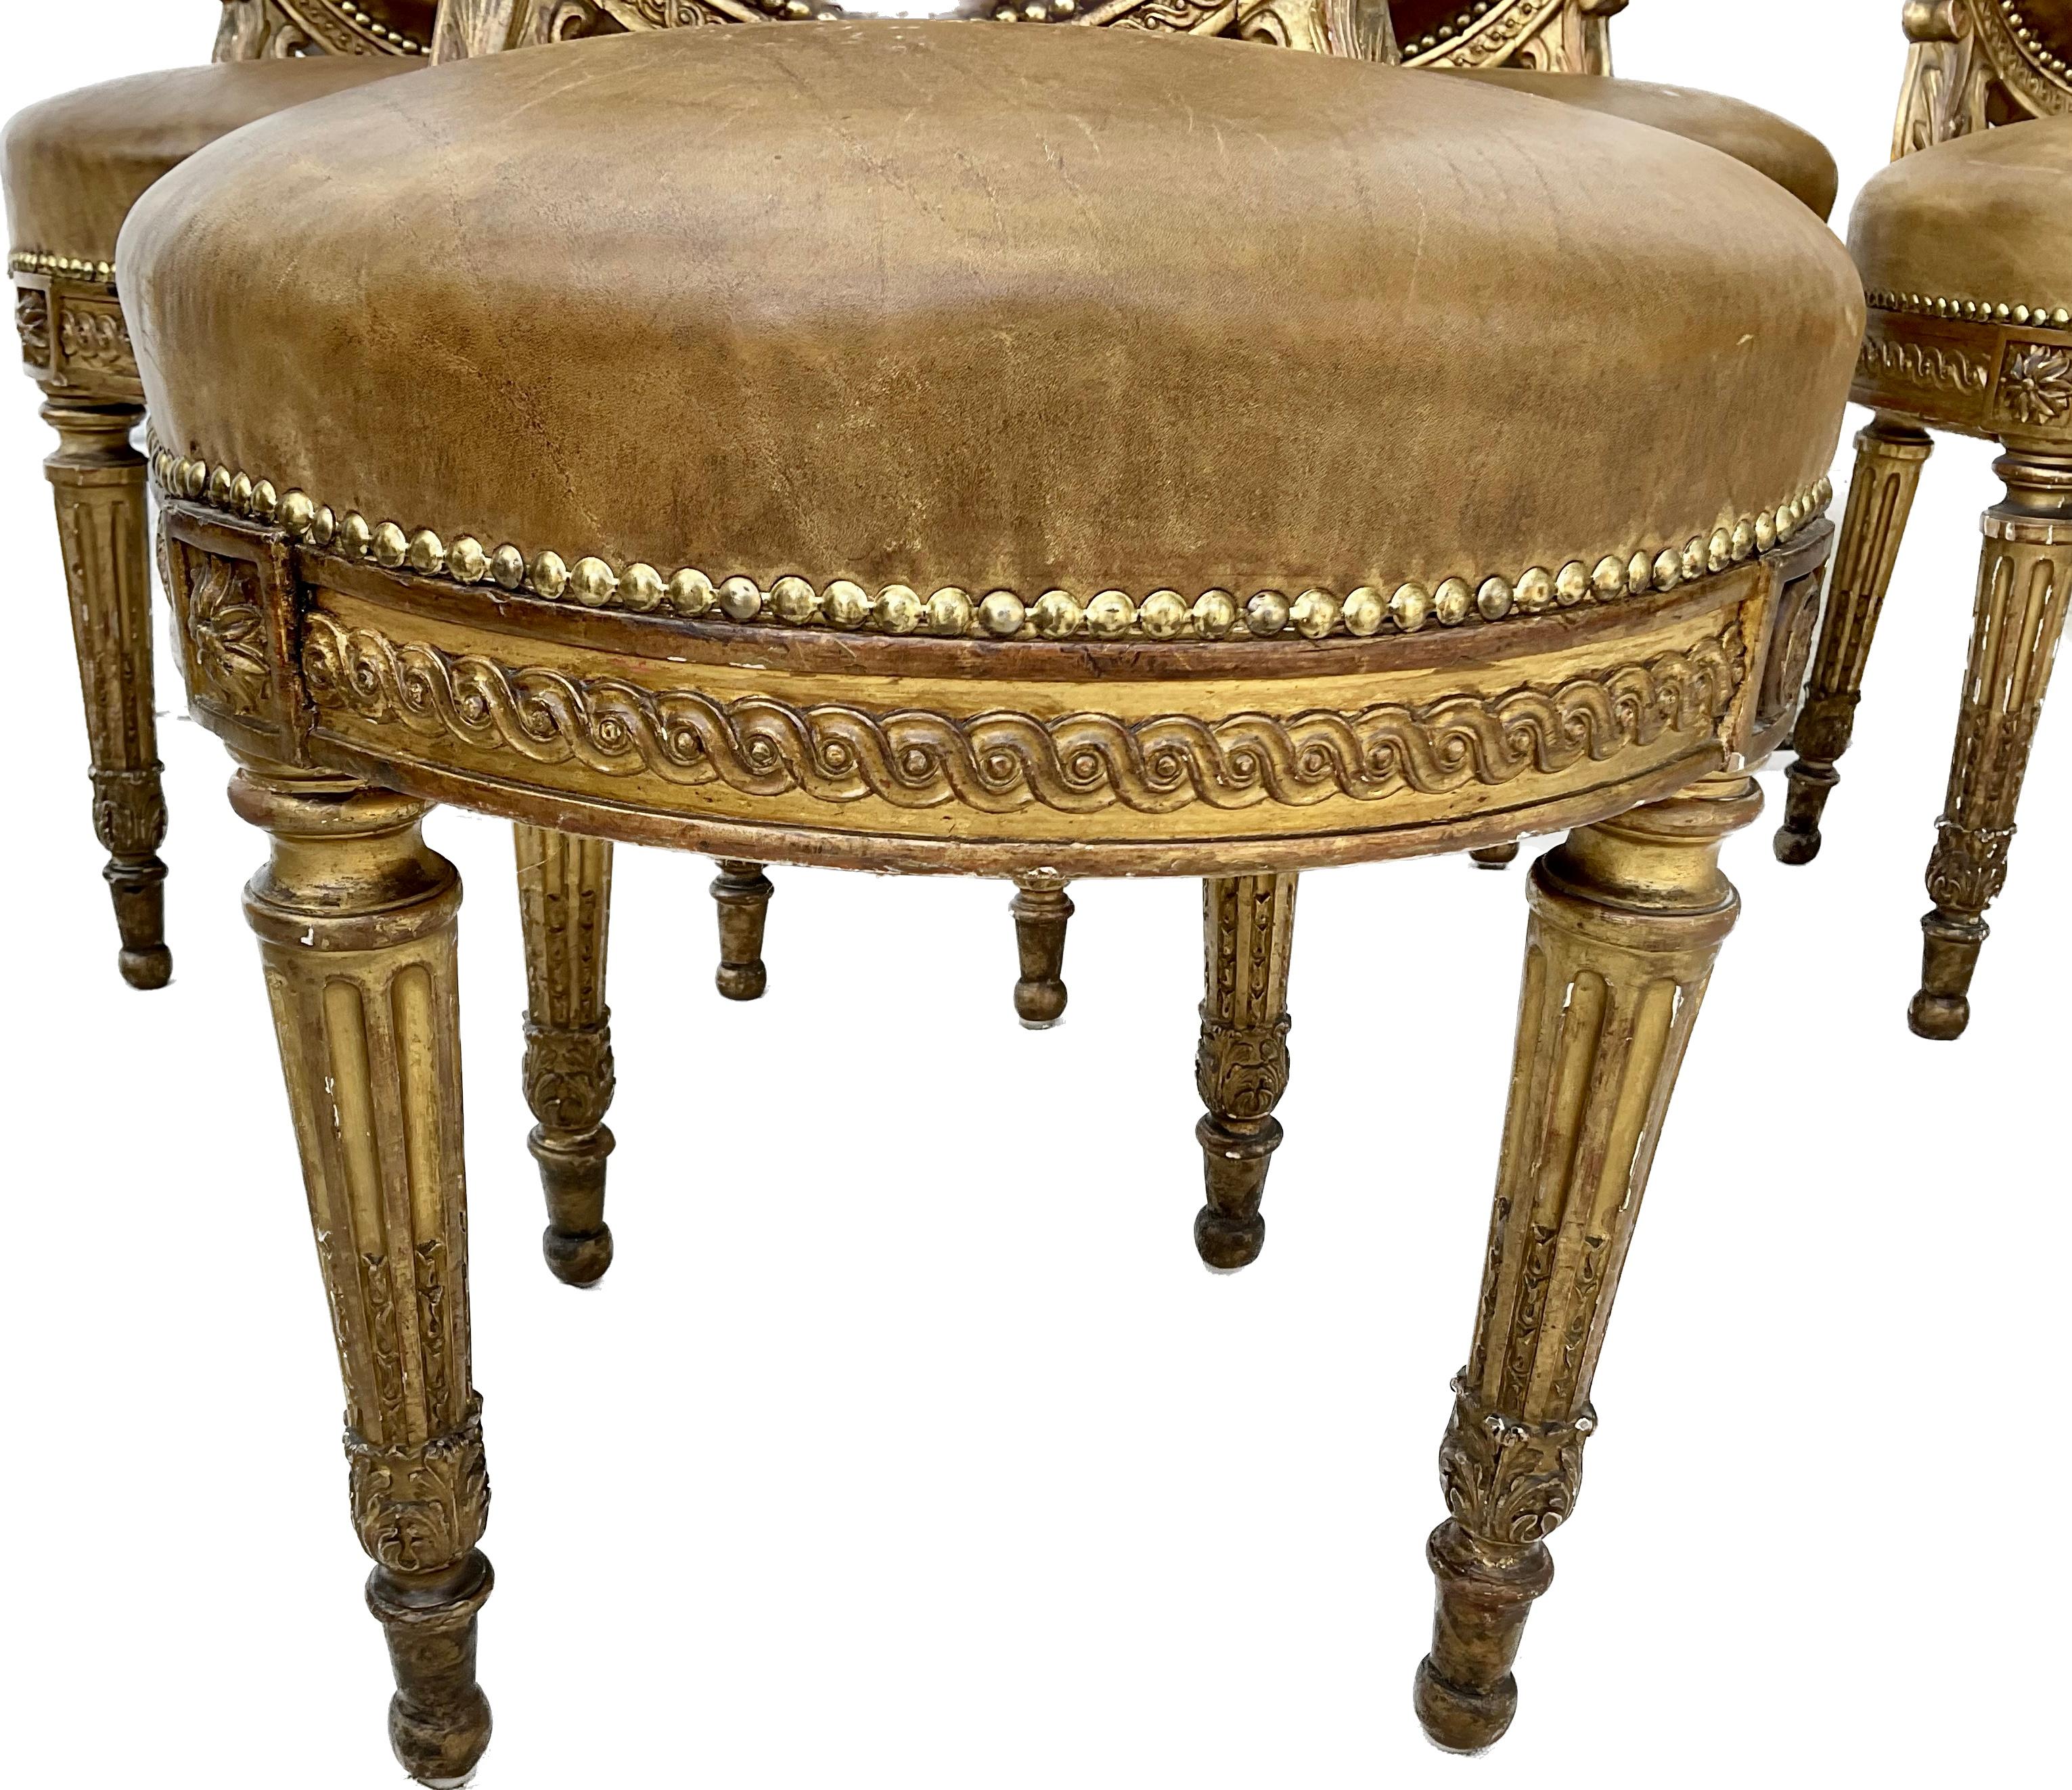 19th Century French Set of Four Louis XVI Style Giltwood Dining Chairs In Good Condition For Sale In Bradenton, FL